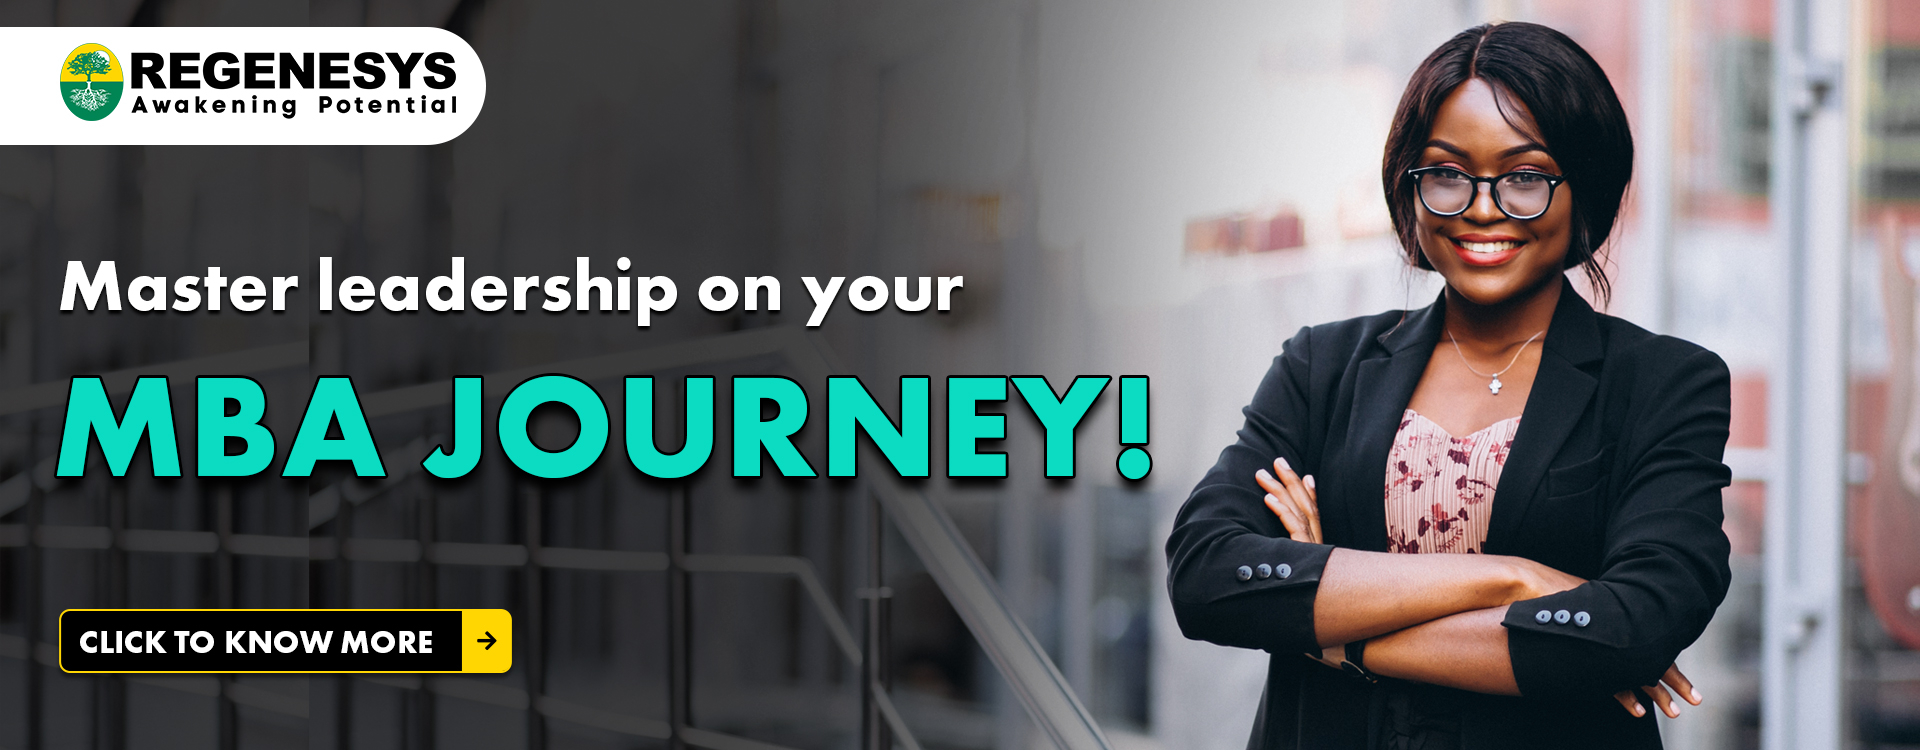 Master leadership on your MBA journey! Click To Know More.